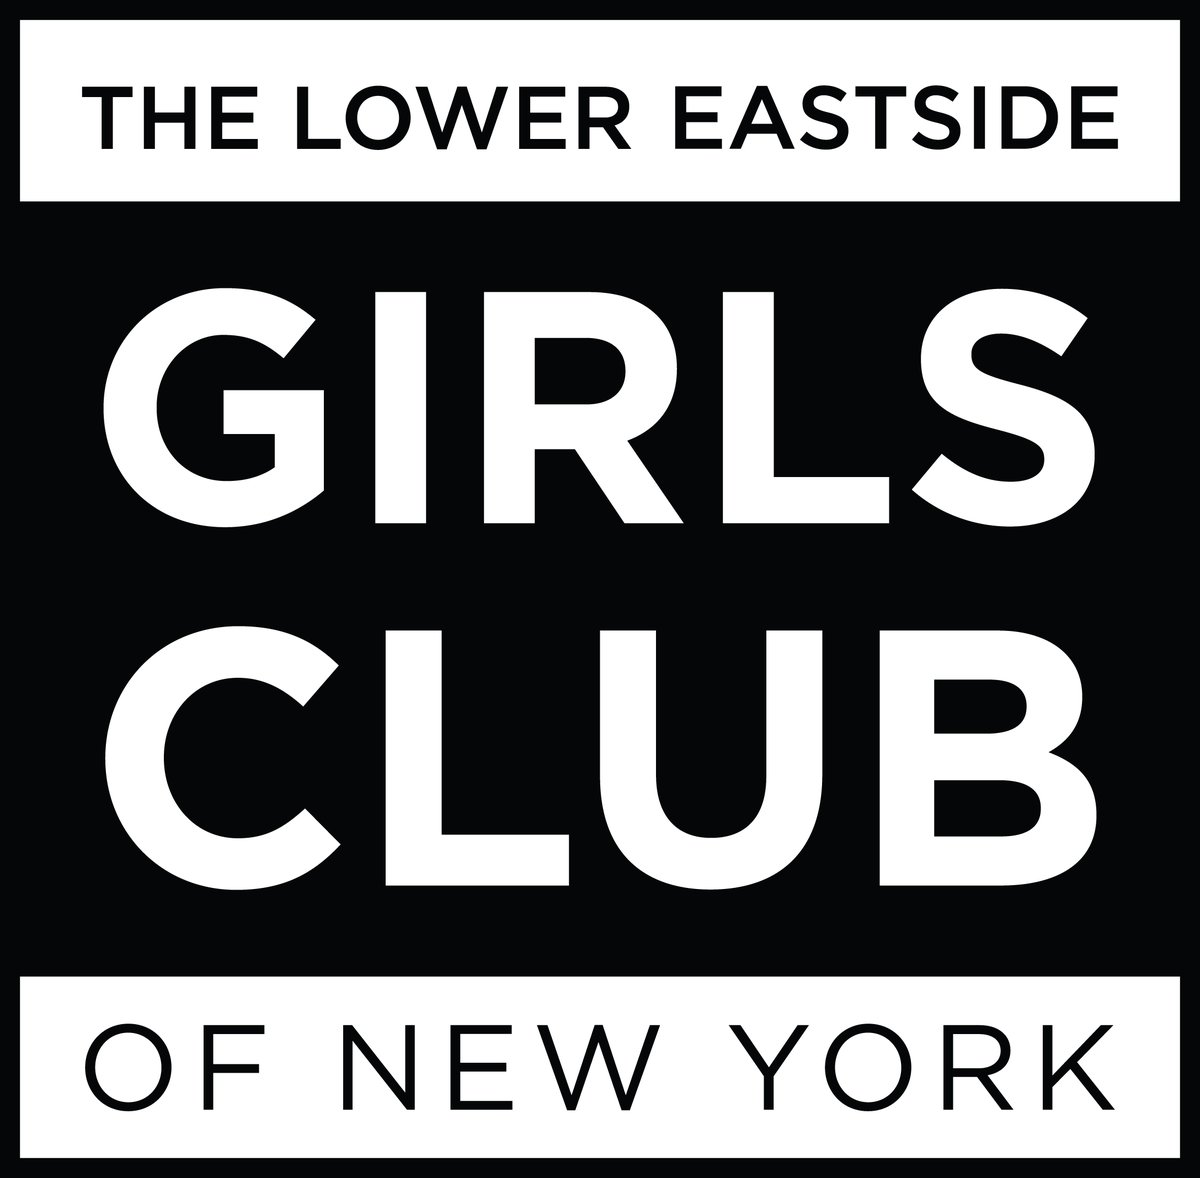 THE NET GALA is in support of the @girlsclubny This is our second event supporting The Lower Eastside Girl’s Club, and definitely not our last. A short lil thread on their work and impact.